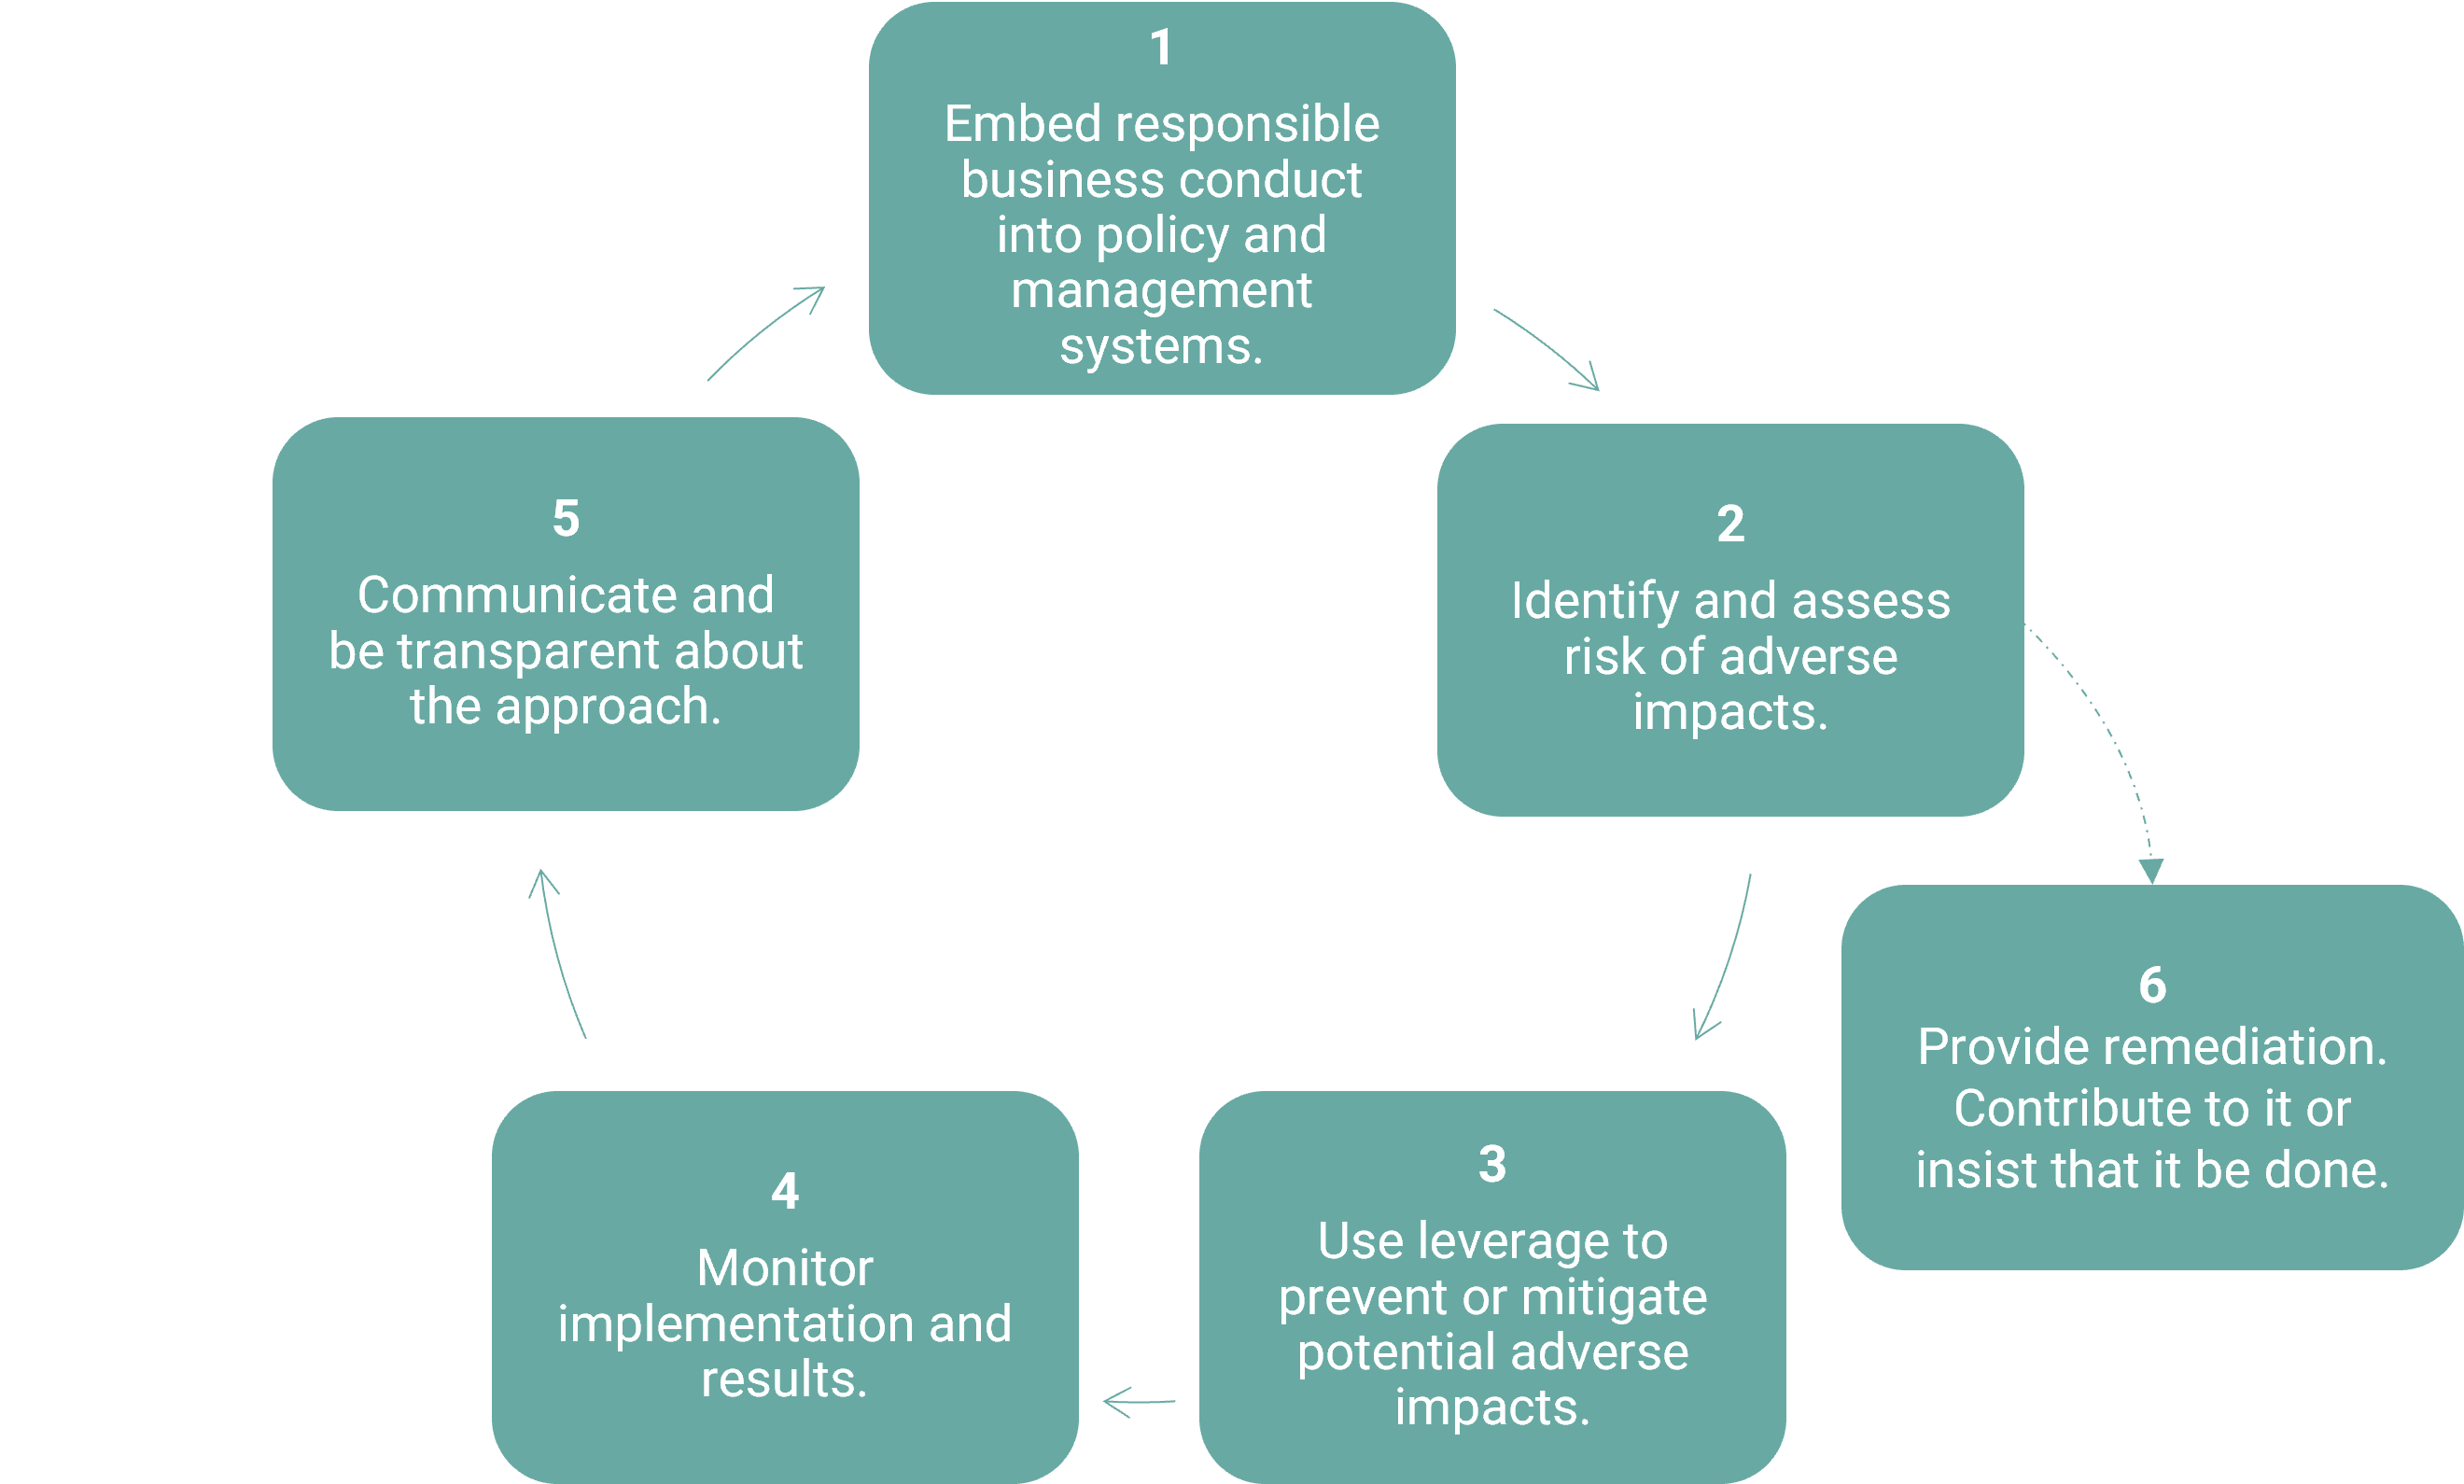 Figure 1: The Due Diligence Process for Responsible Business Conduct | Morningstar Sustainalytics